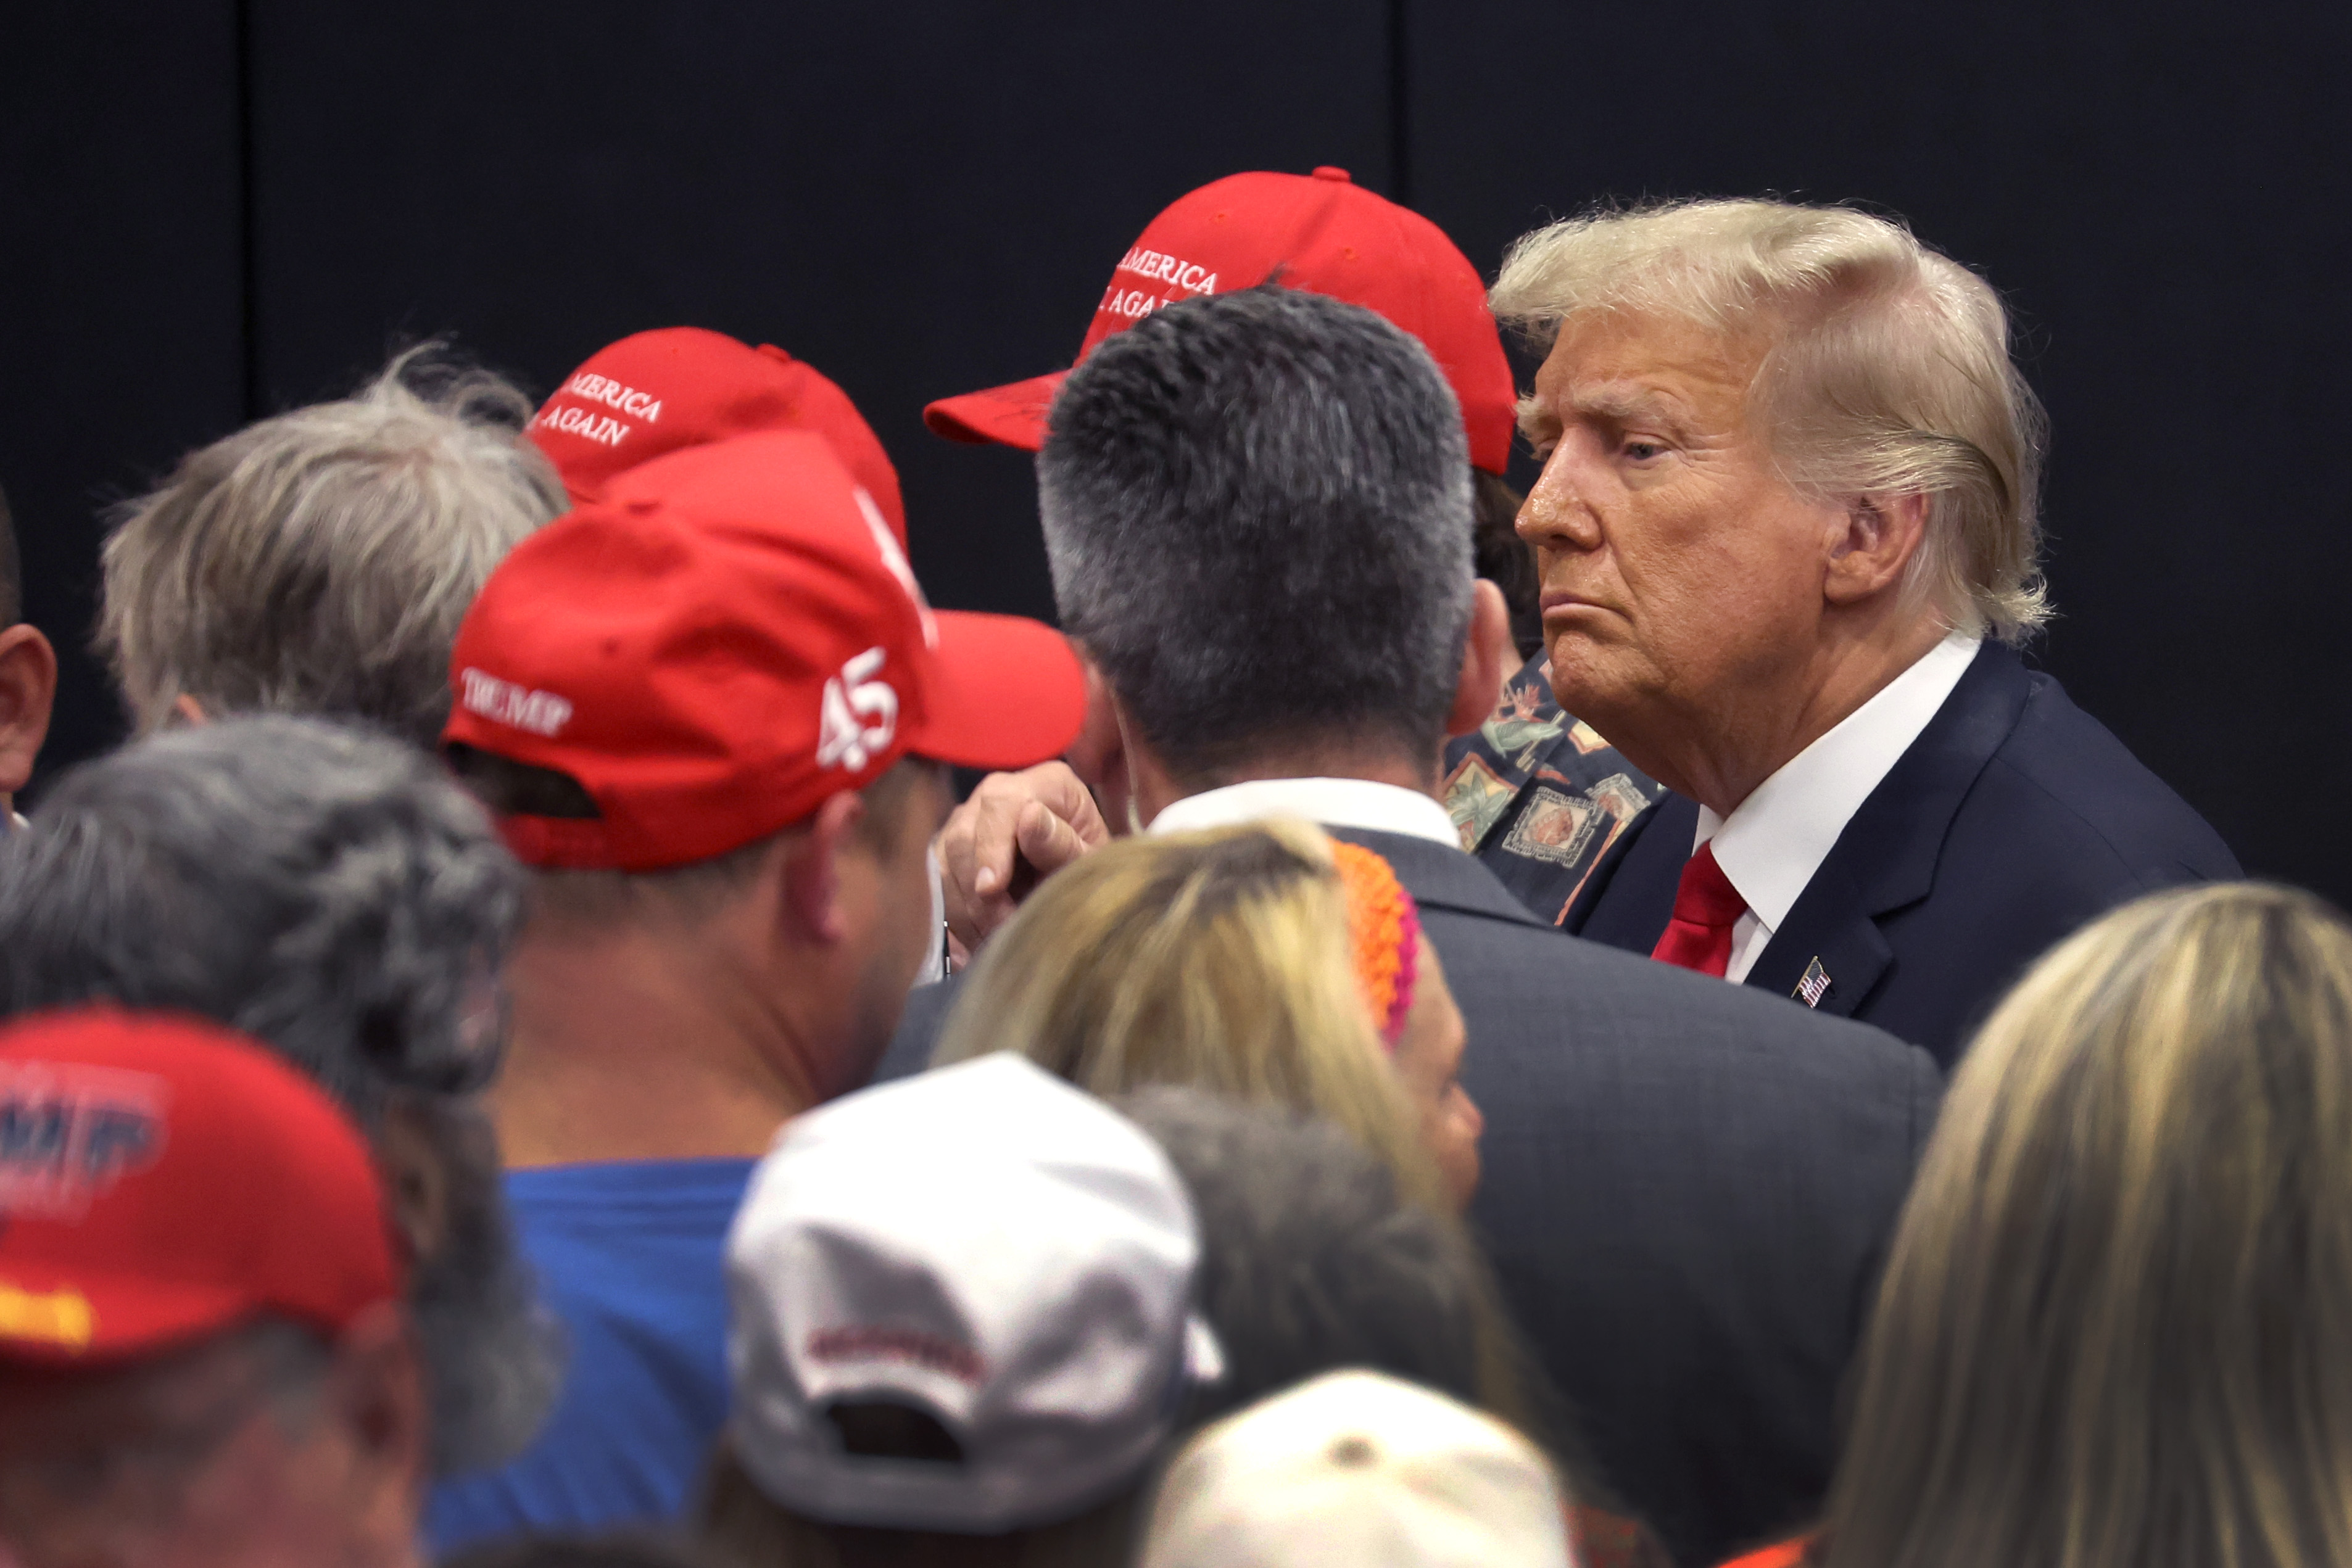 Donald Trump in a crowd of supporters